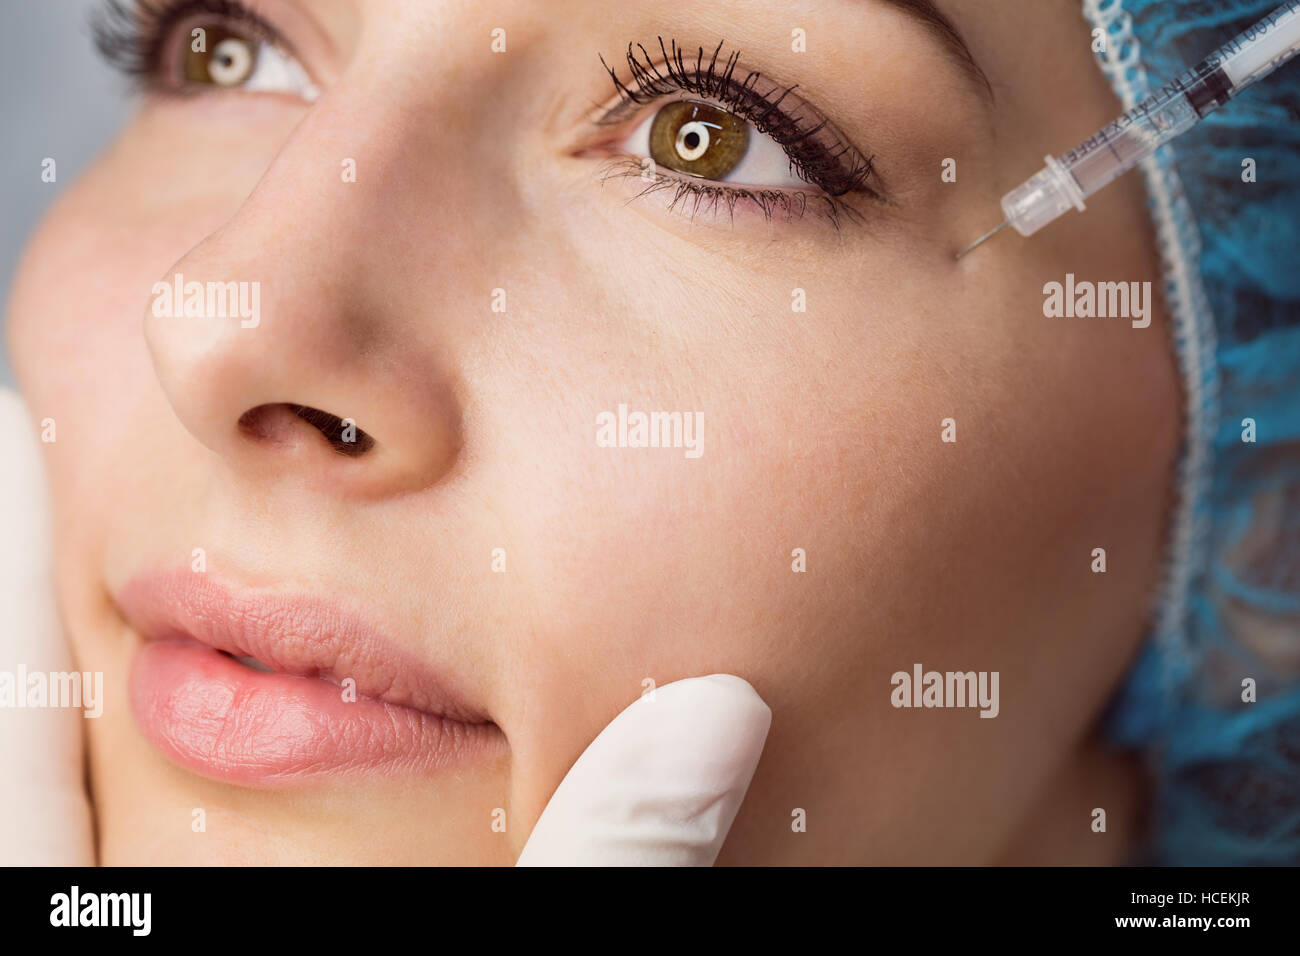 Young woman receiving botox injection on her face Stock Photo